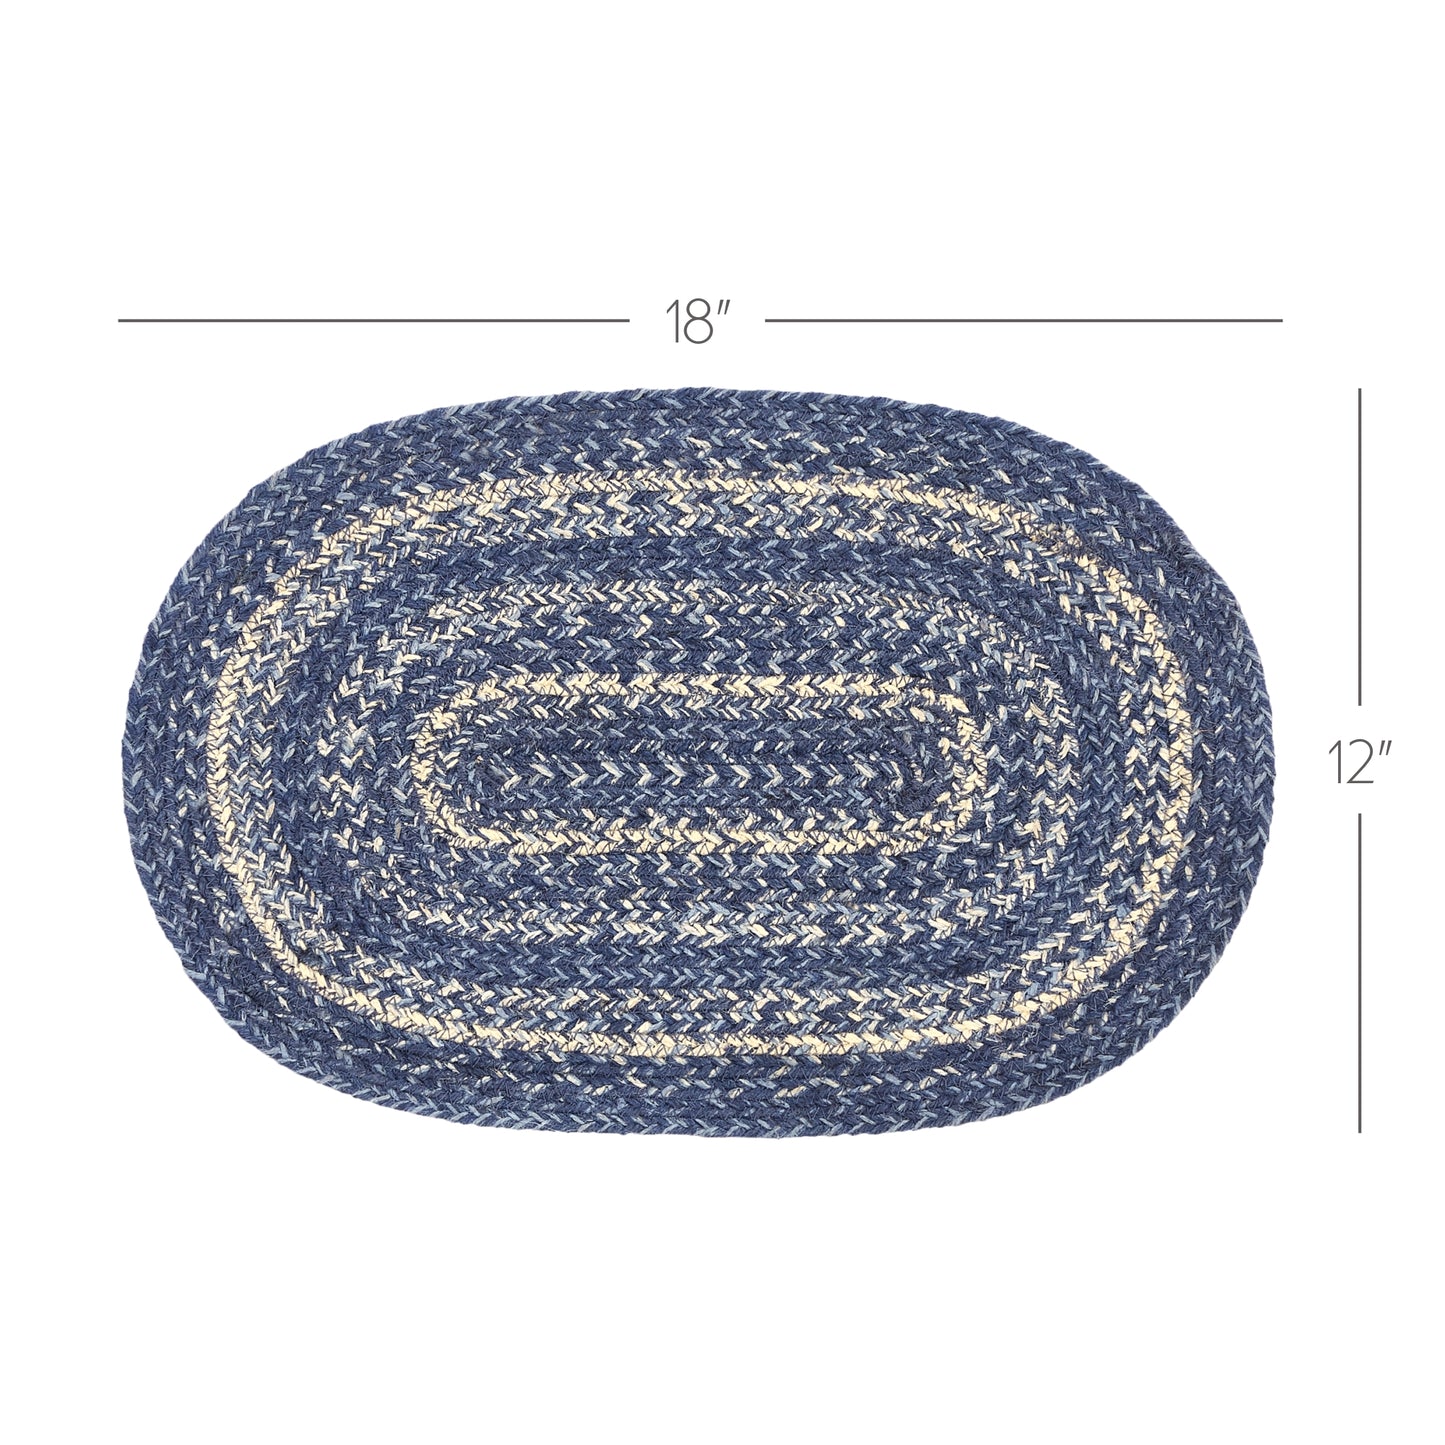 67098-Great-Falls-Blue-Jute-Oval-Placemat-12x18-image-3